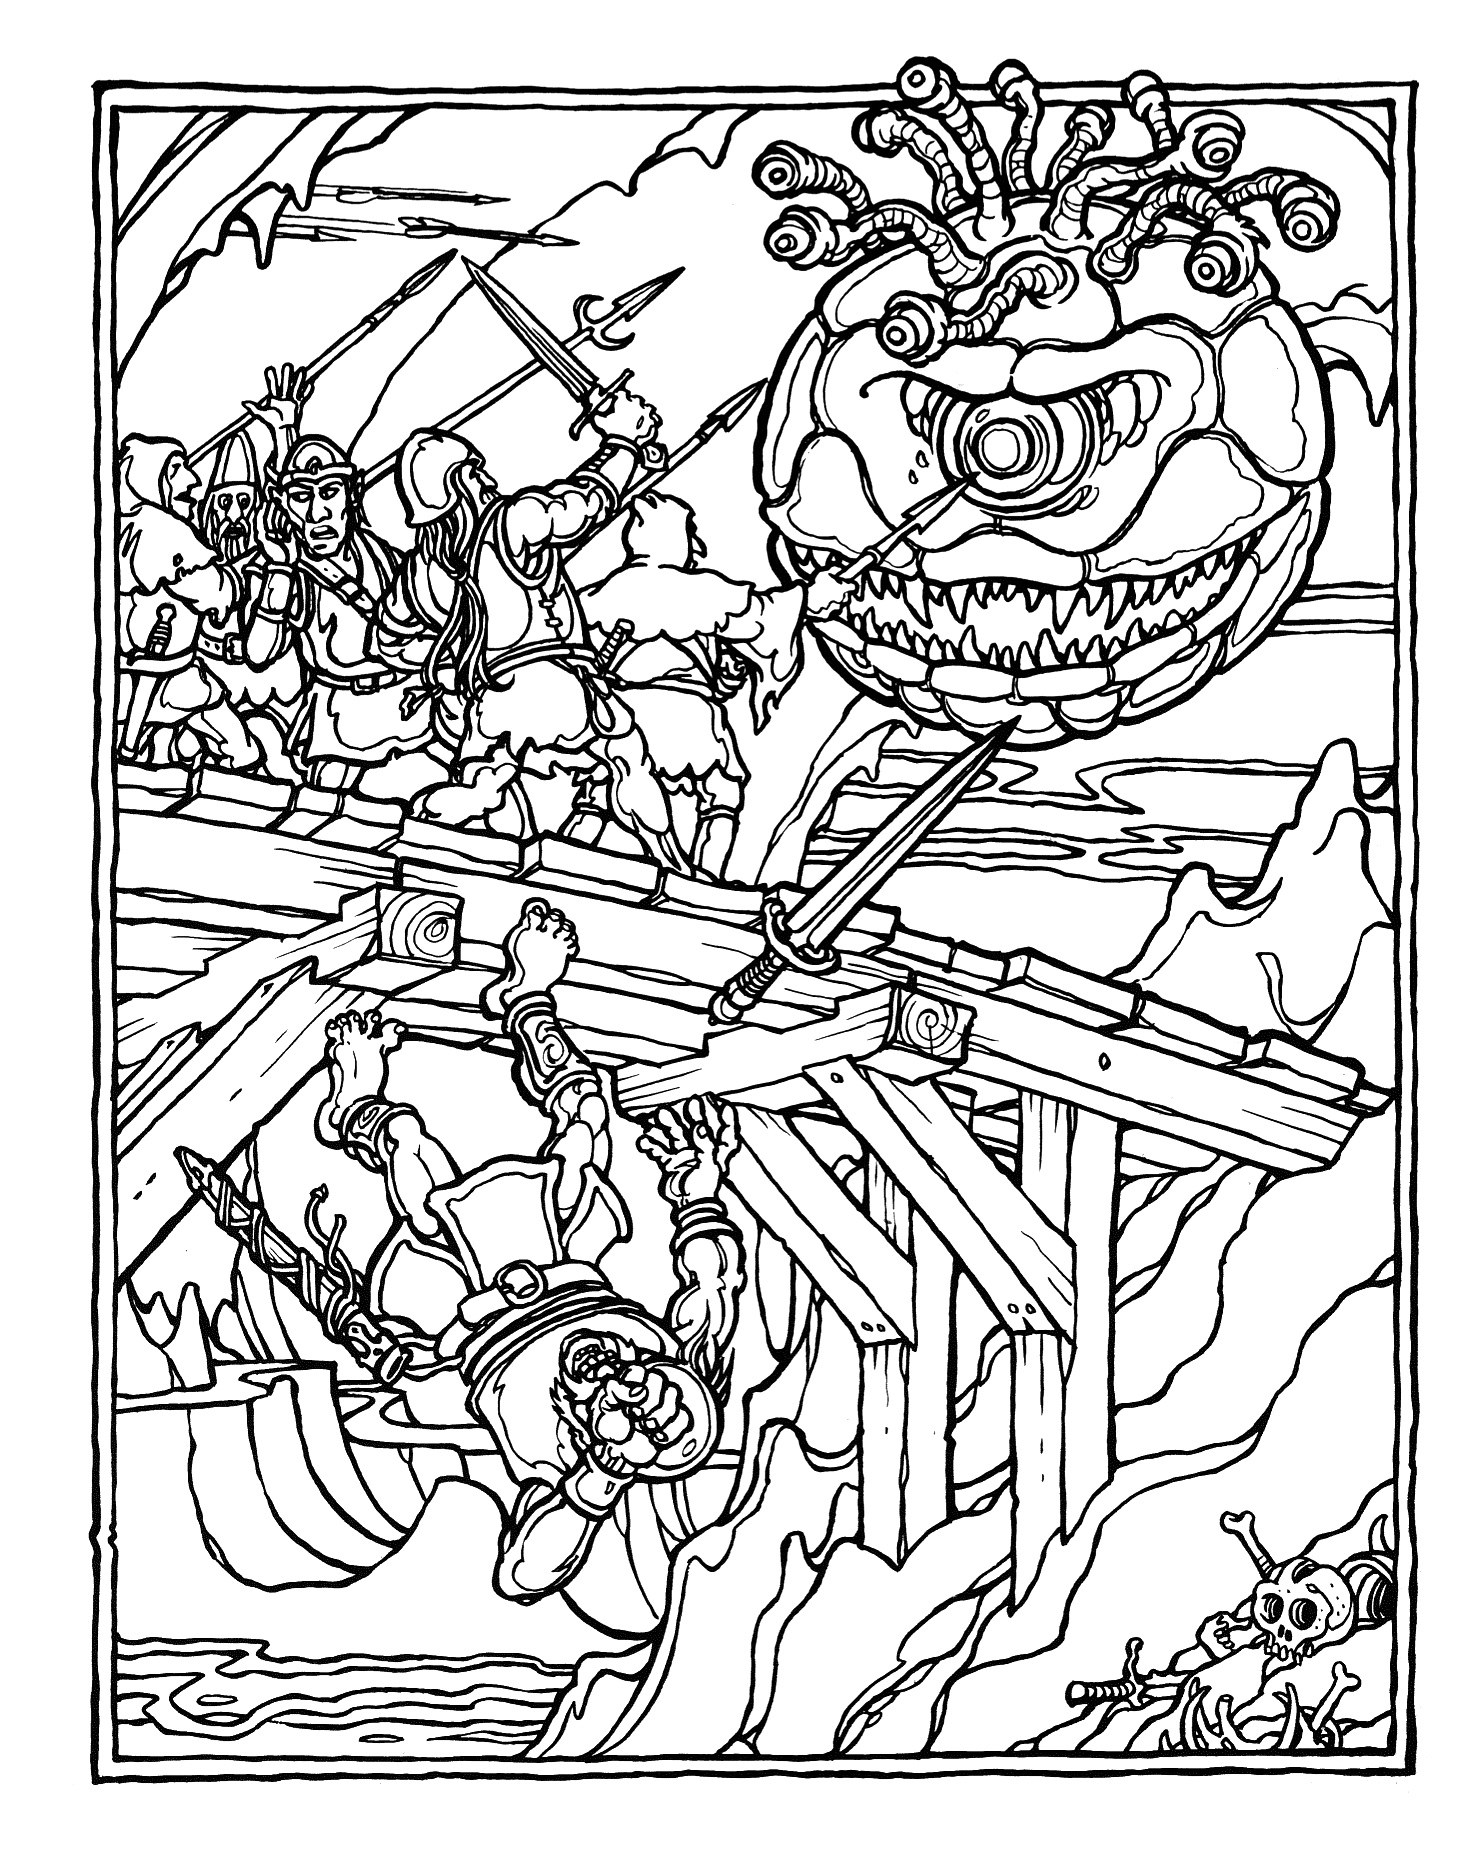 MONSTER BRAINS: The Official Advanced Dungeons and Dragons Coloring Book -  Illustrated by Greg Irons (1979)